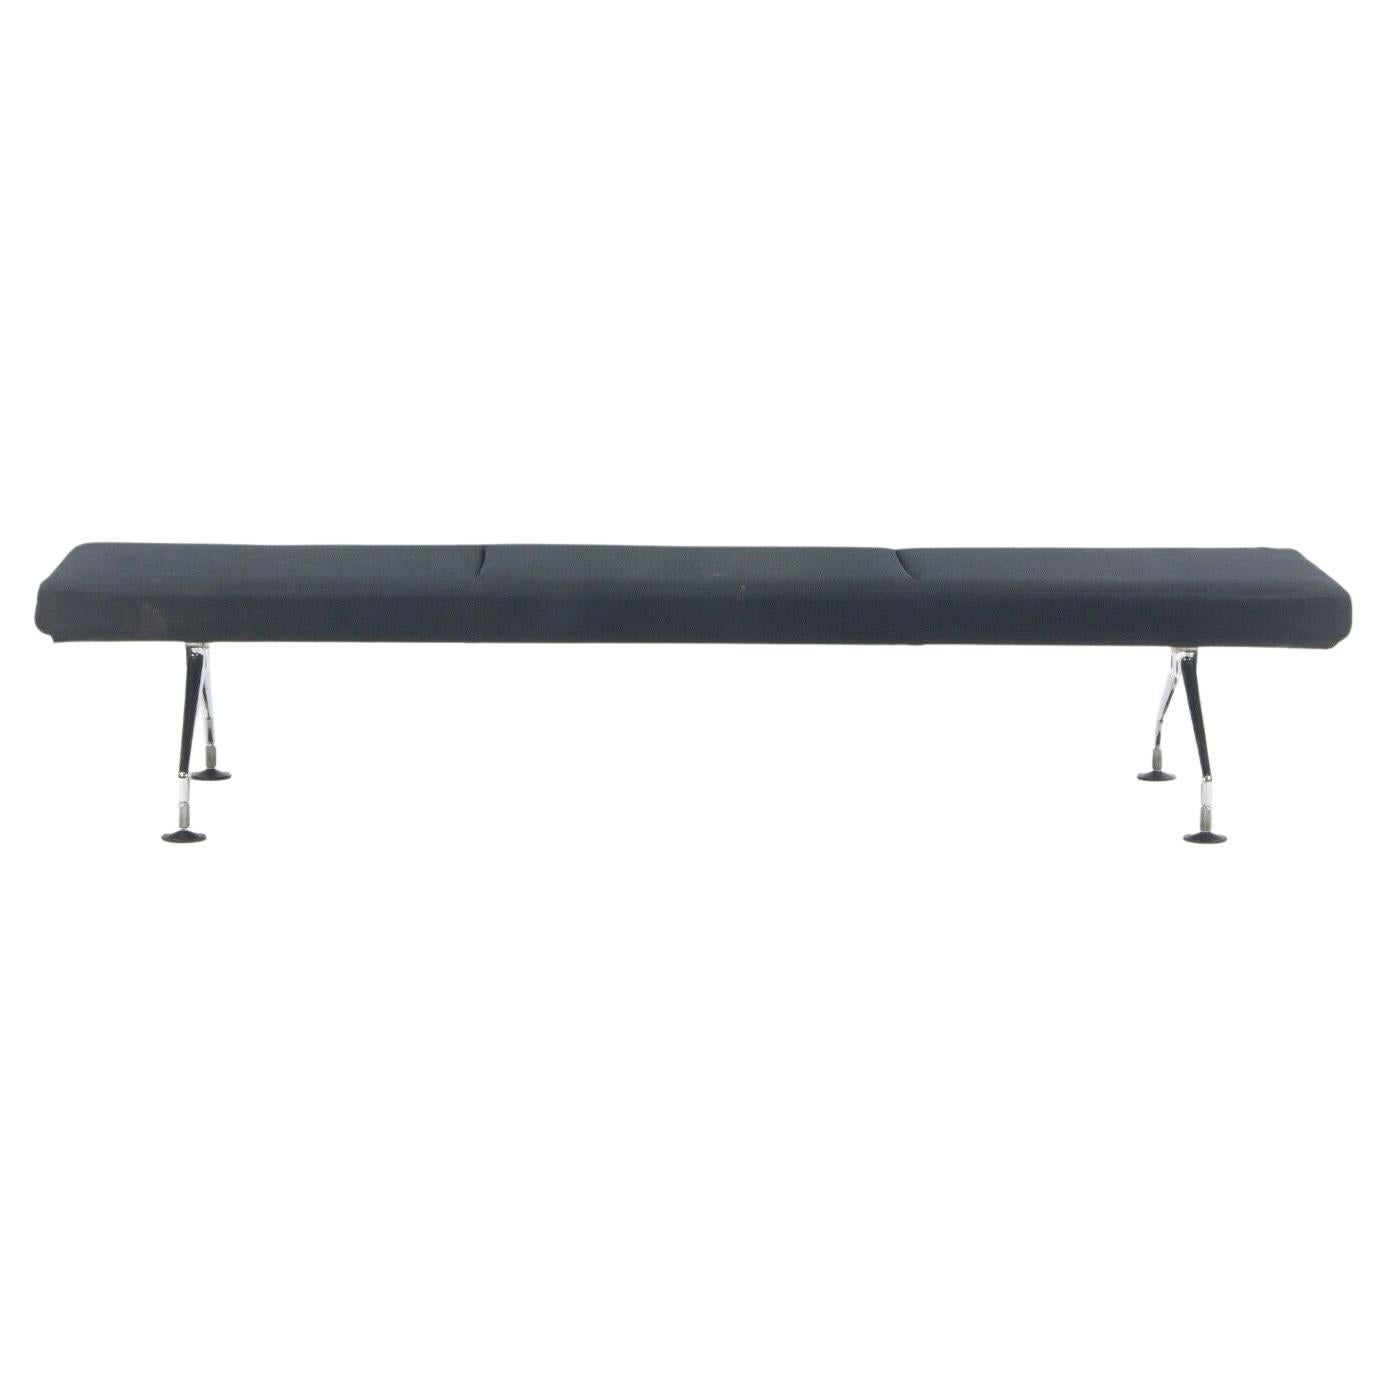 1989 Antonio Citterio for Vitra Area Montage Daybed Bench Sofa w/ Black Fabric For Sale